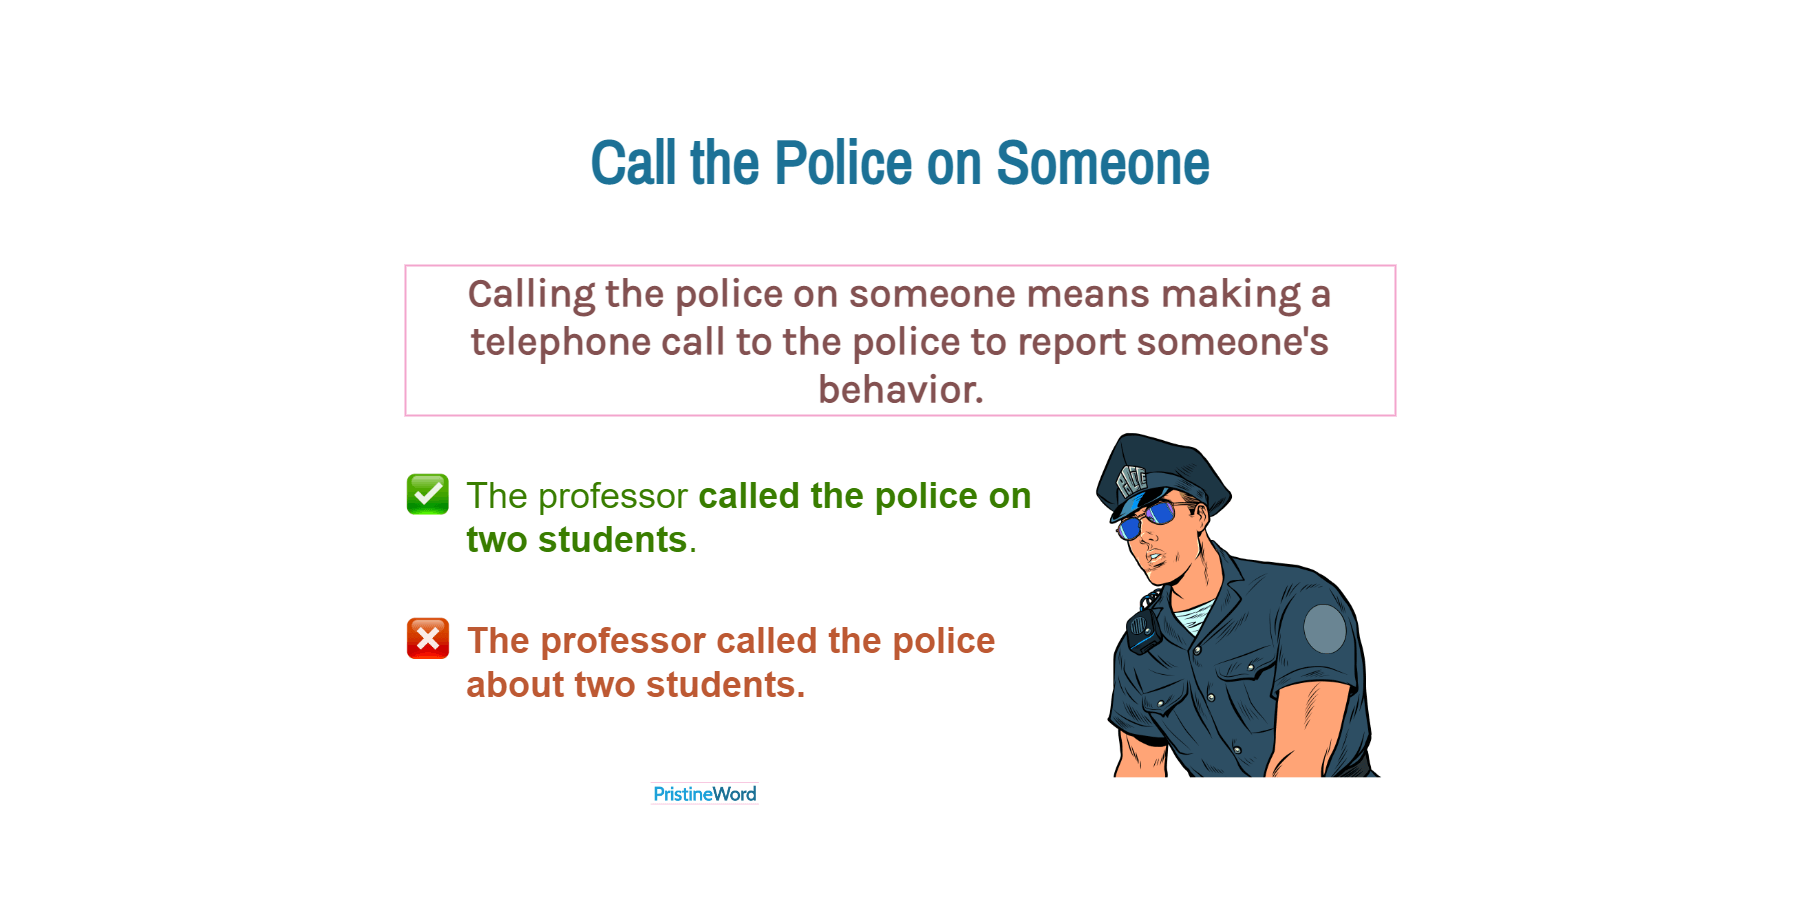 'Call the Police on Someone'. Meaning